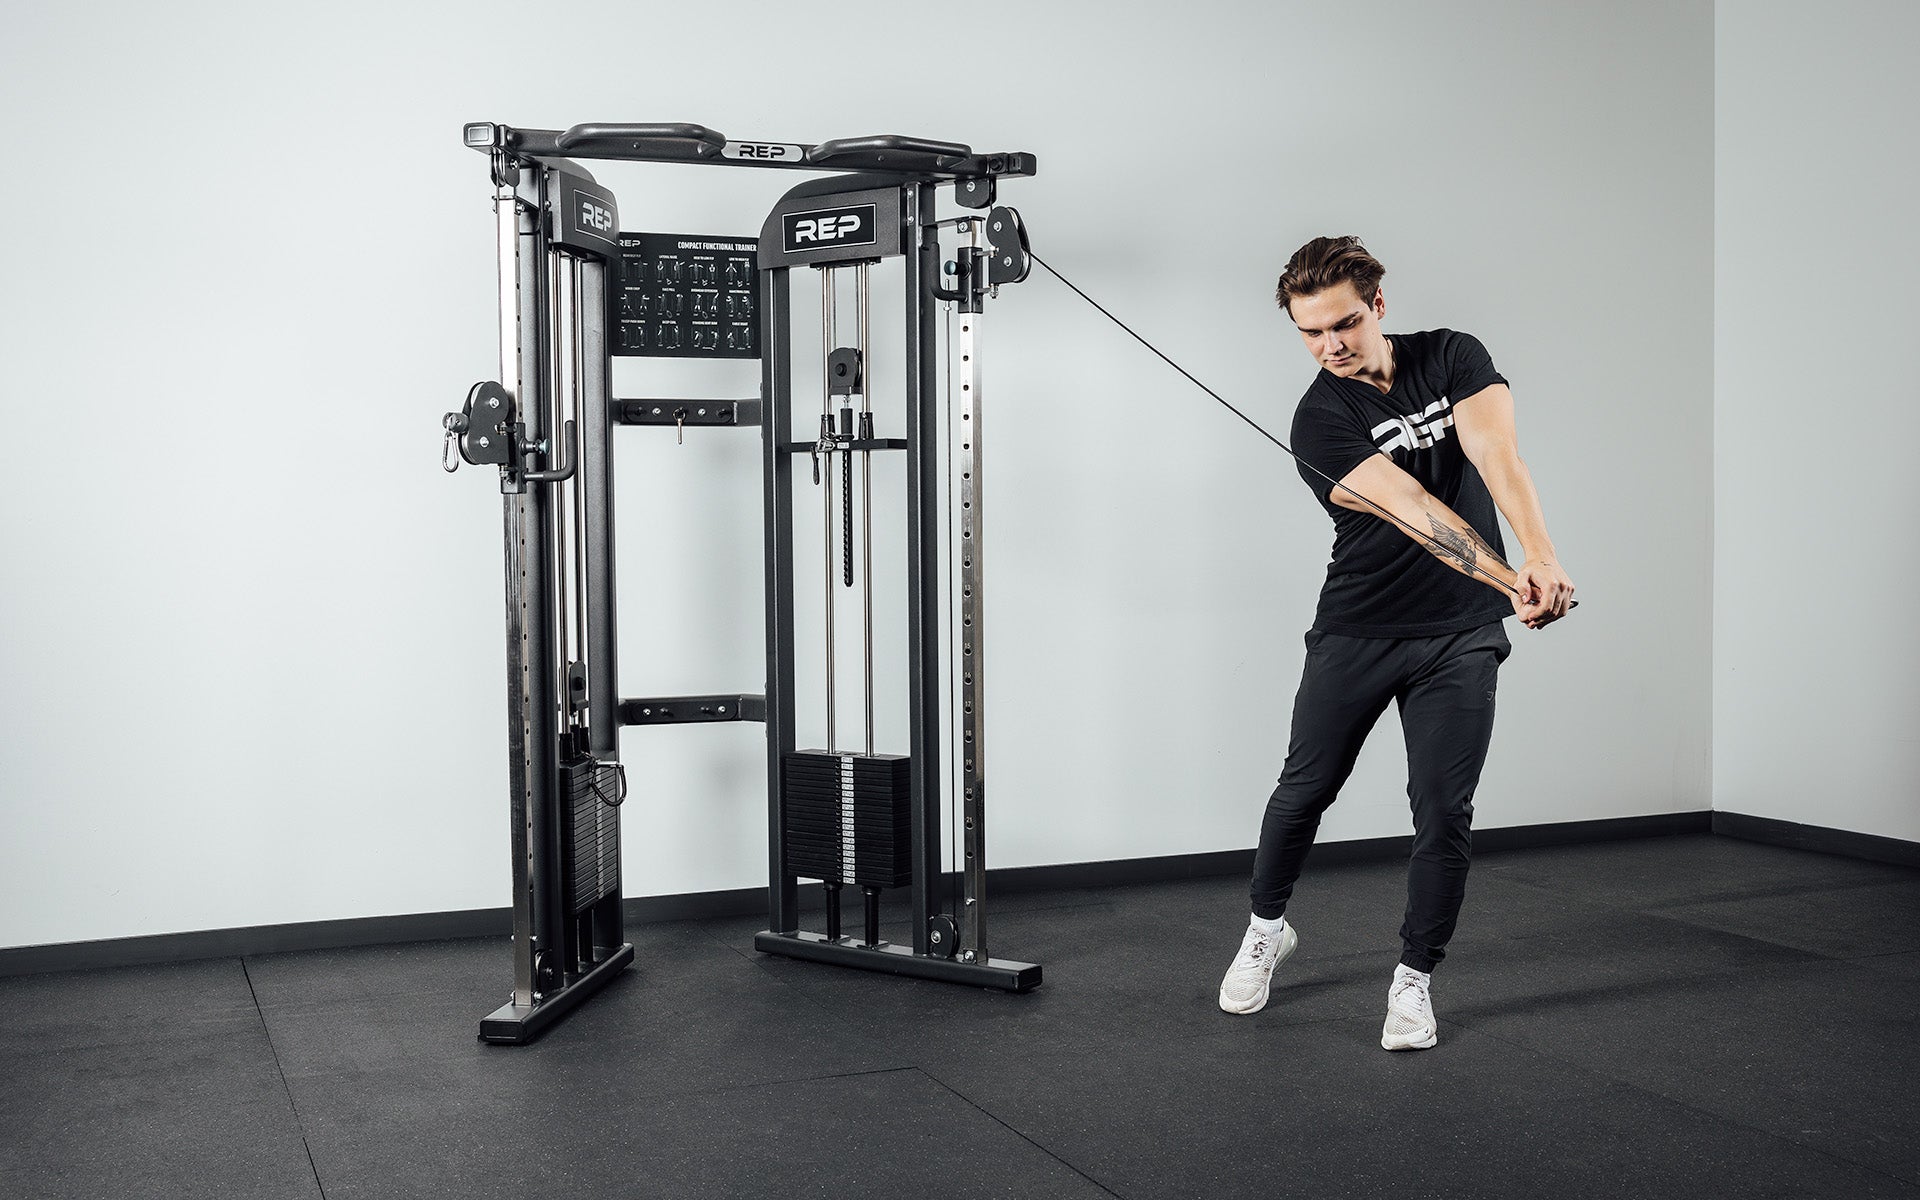 FT-3000 Compact Functional Trainer 2.0 Being Used For Wood Choppers with Sports Handle Cable Attachment